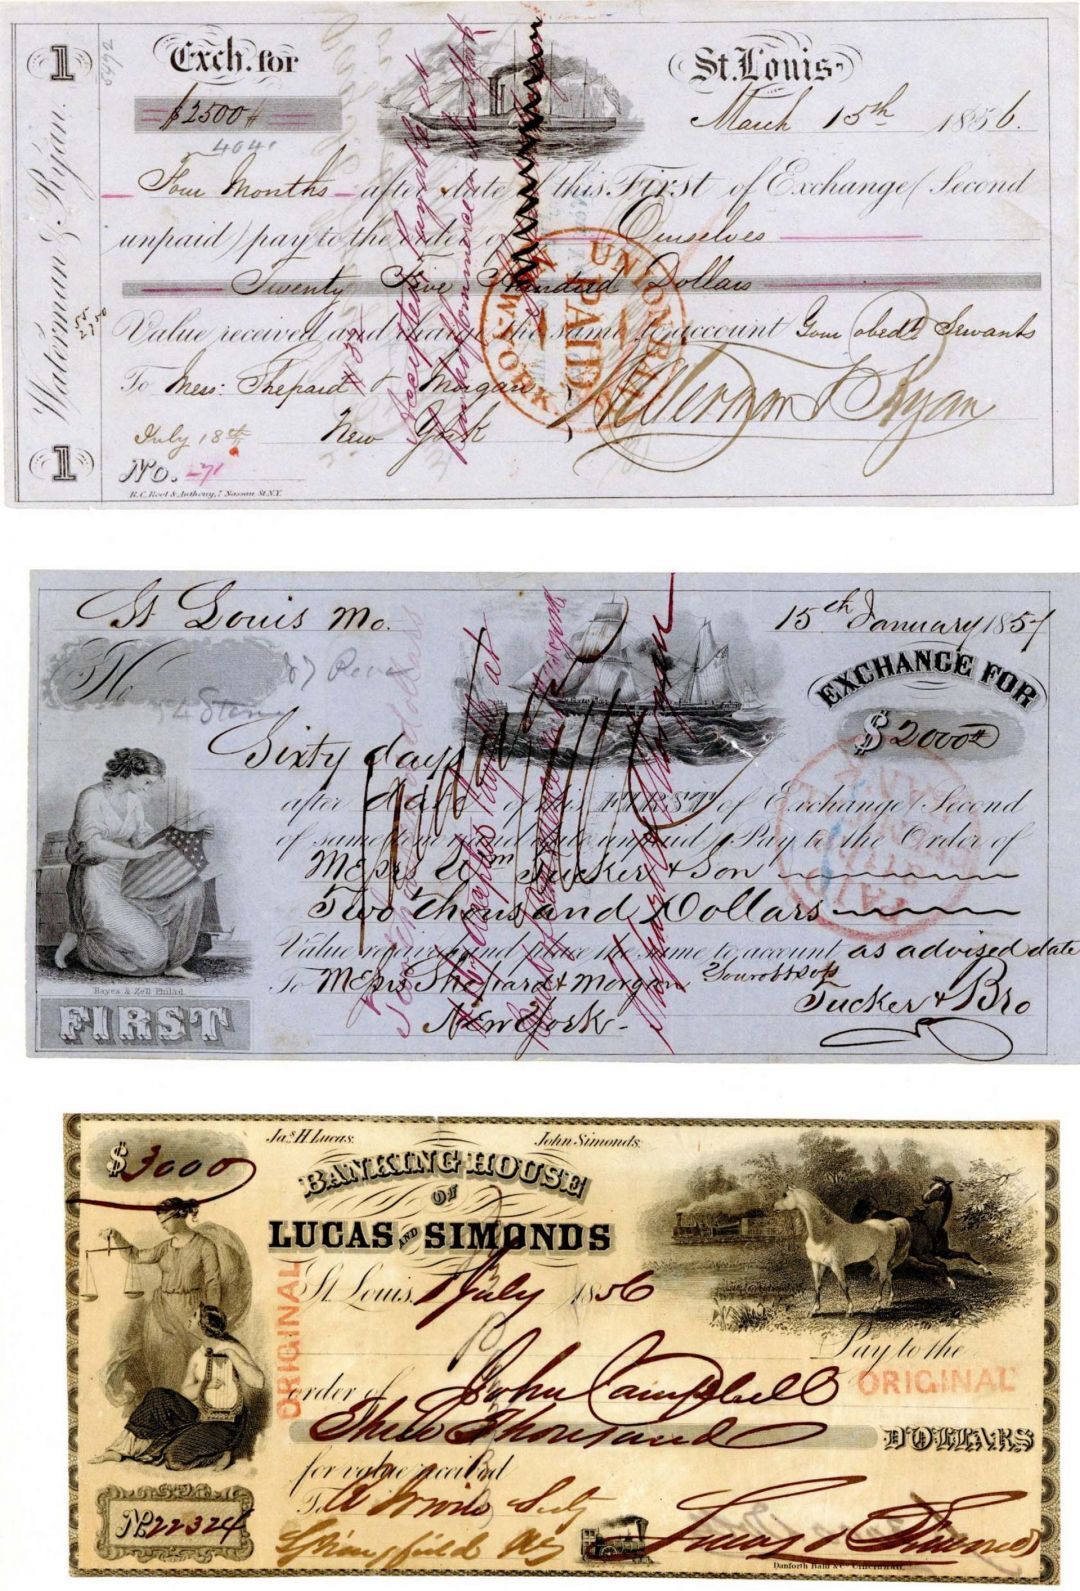 Group of 5 Different Checks with Revenues - Check - Checks with Revenue Stamps